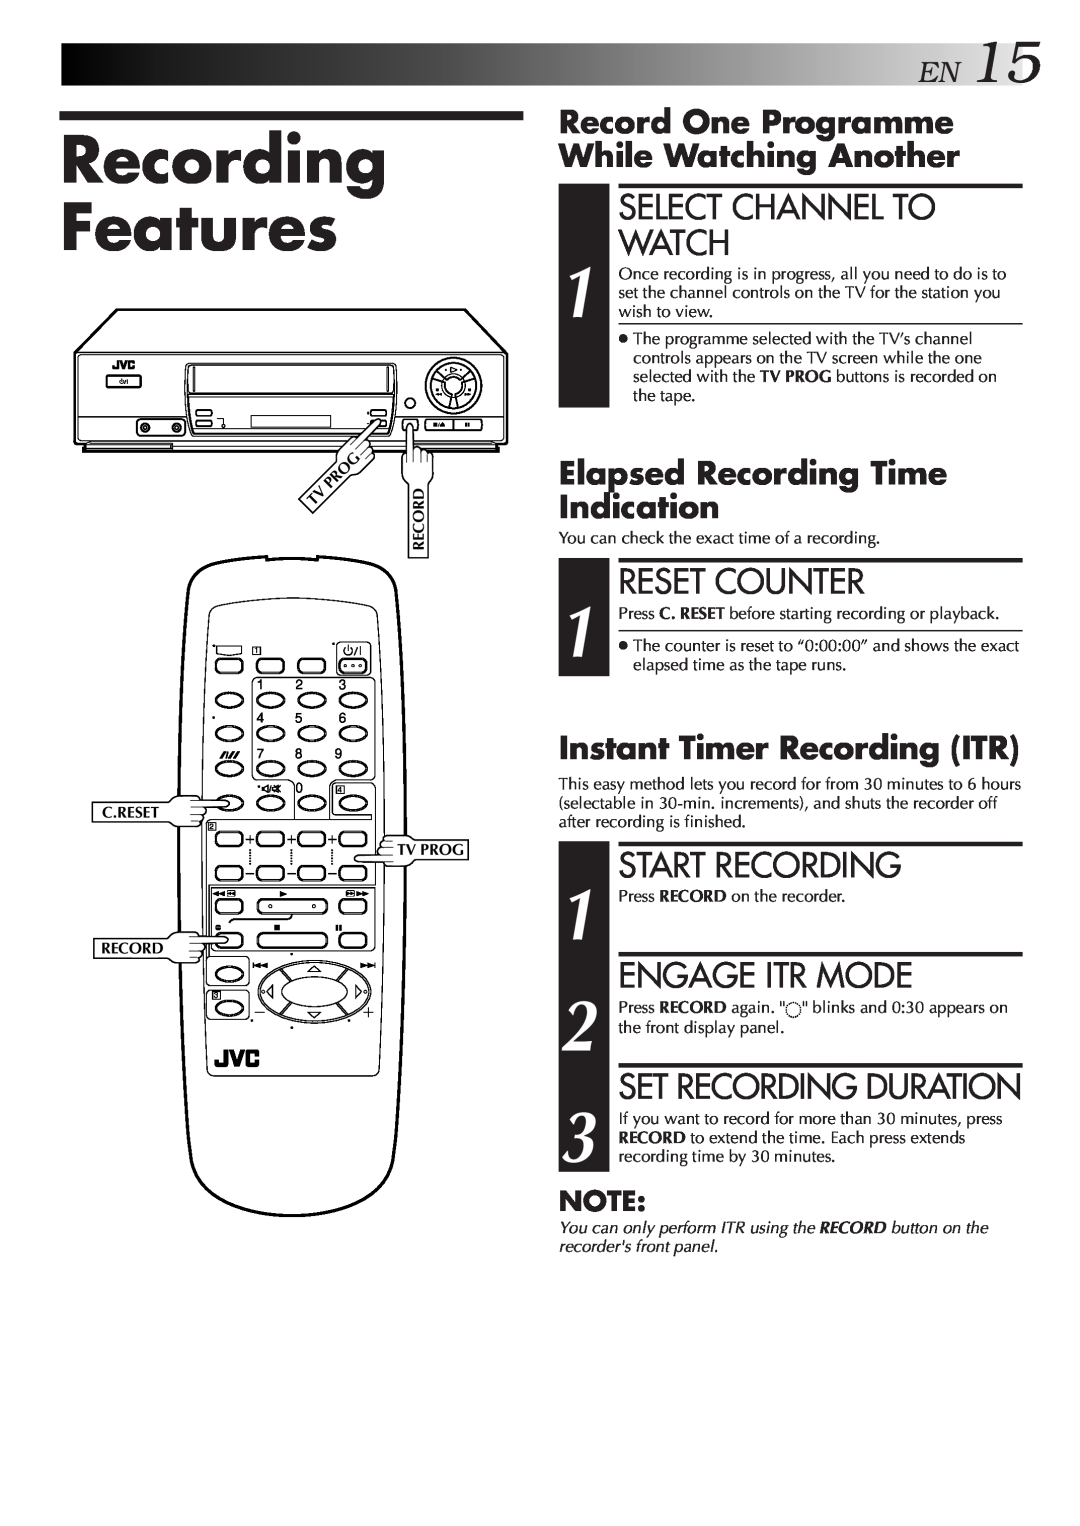 JVC HR-J457MS Recording Features, EN15, Select Channel To Watch, Reset Counter, Engage Itr Mode, Set Recording Duration 